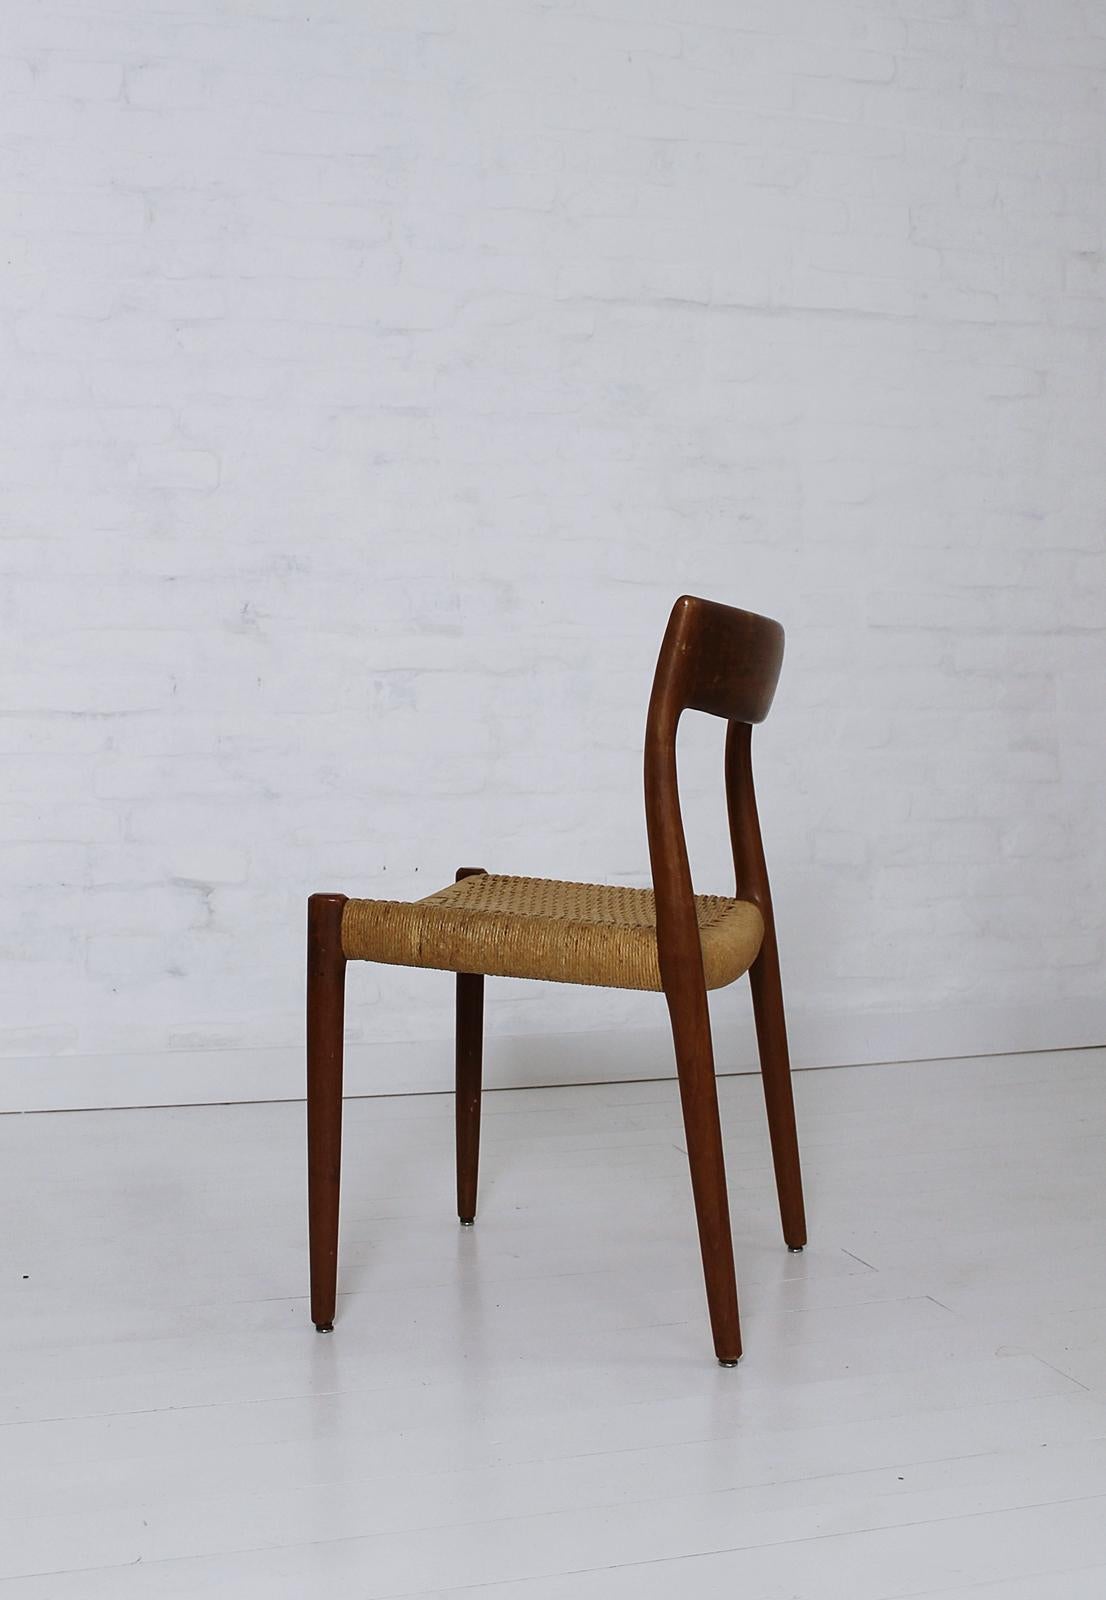 Danish Set of 3 Chairs Model 77 by Niels O. Møller in Teak and Paper Cord, 1950s